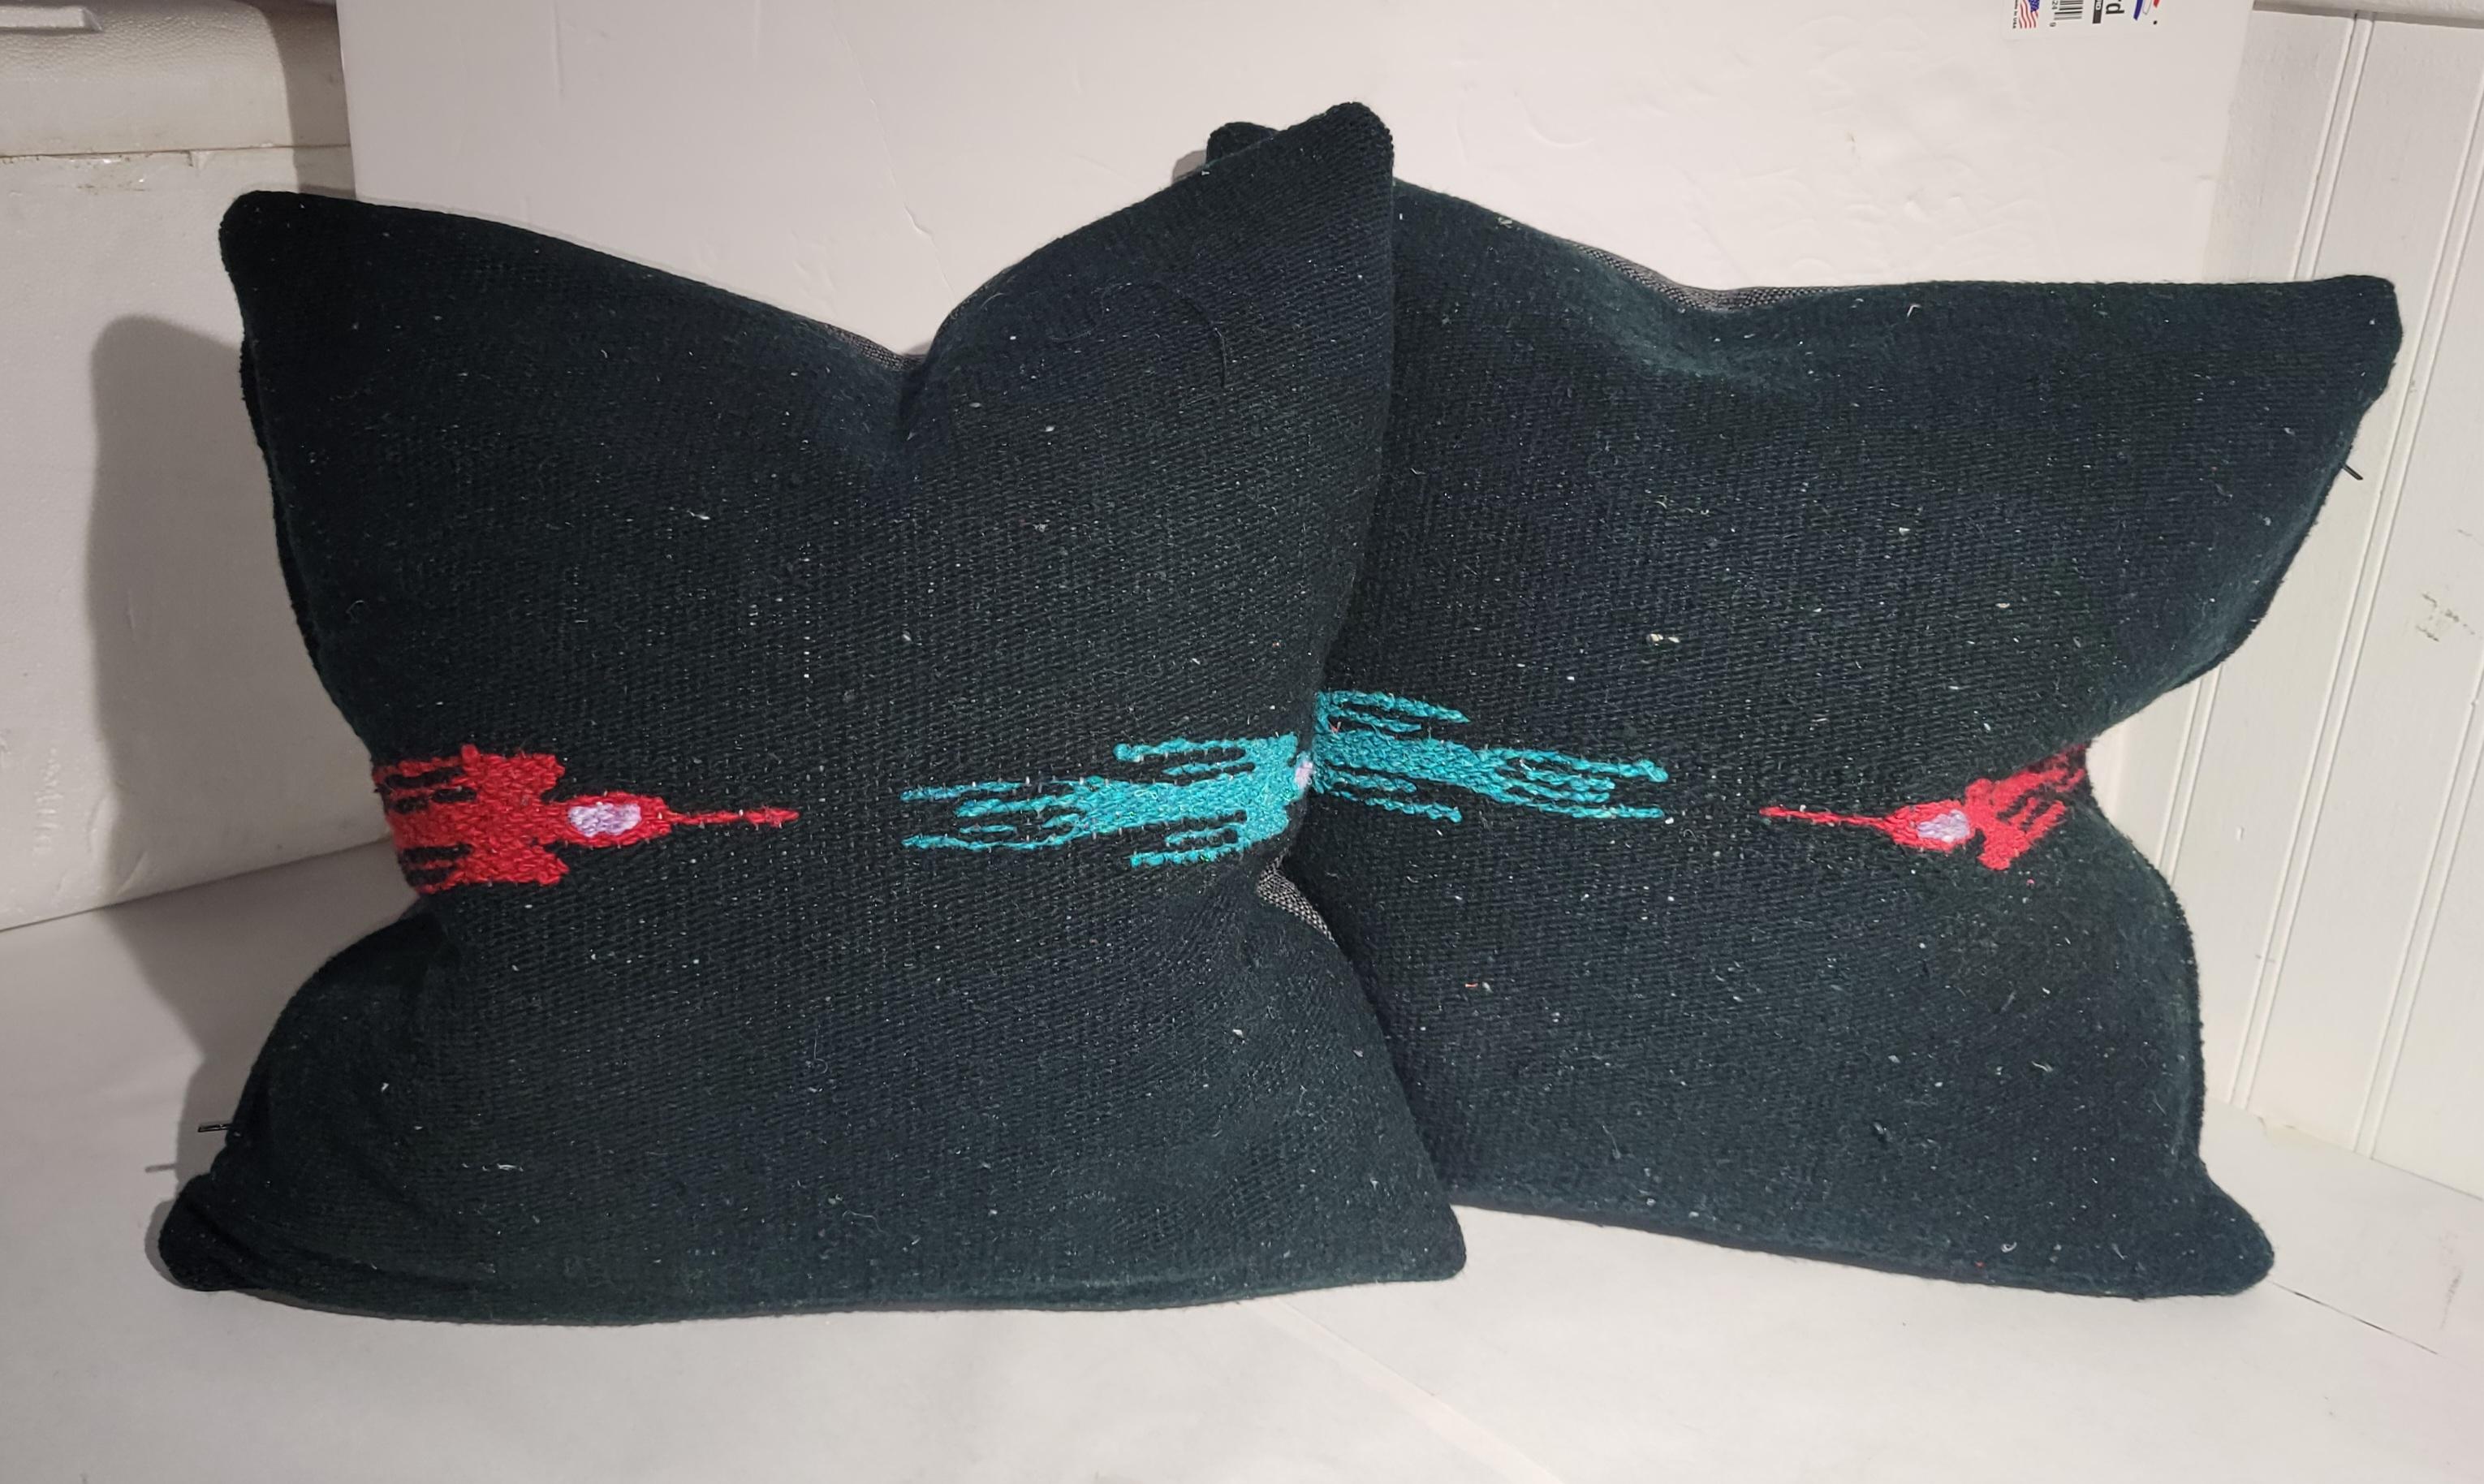 Pair of wool hand made birds in flight pillows. Black background with blue and red birds in flight. Vintage fabrics made into pillows